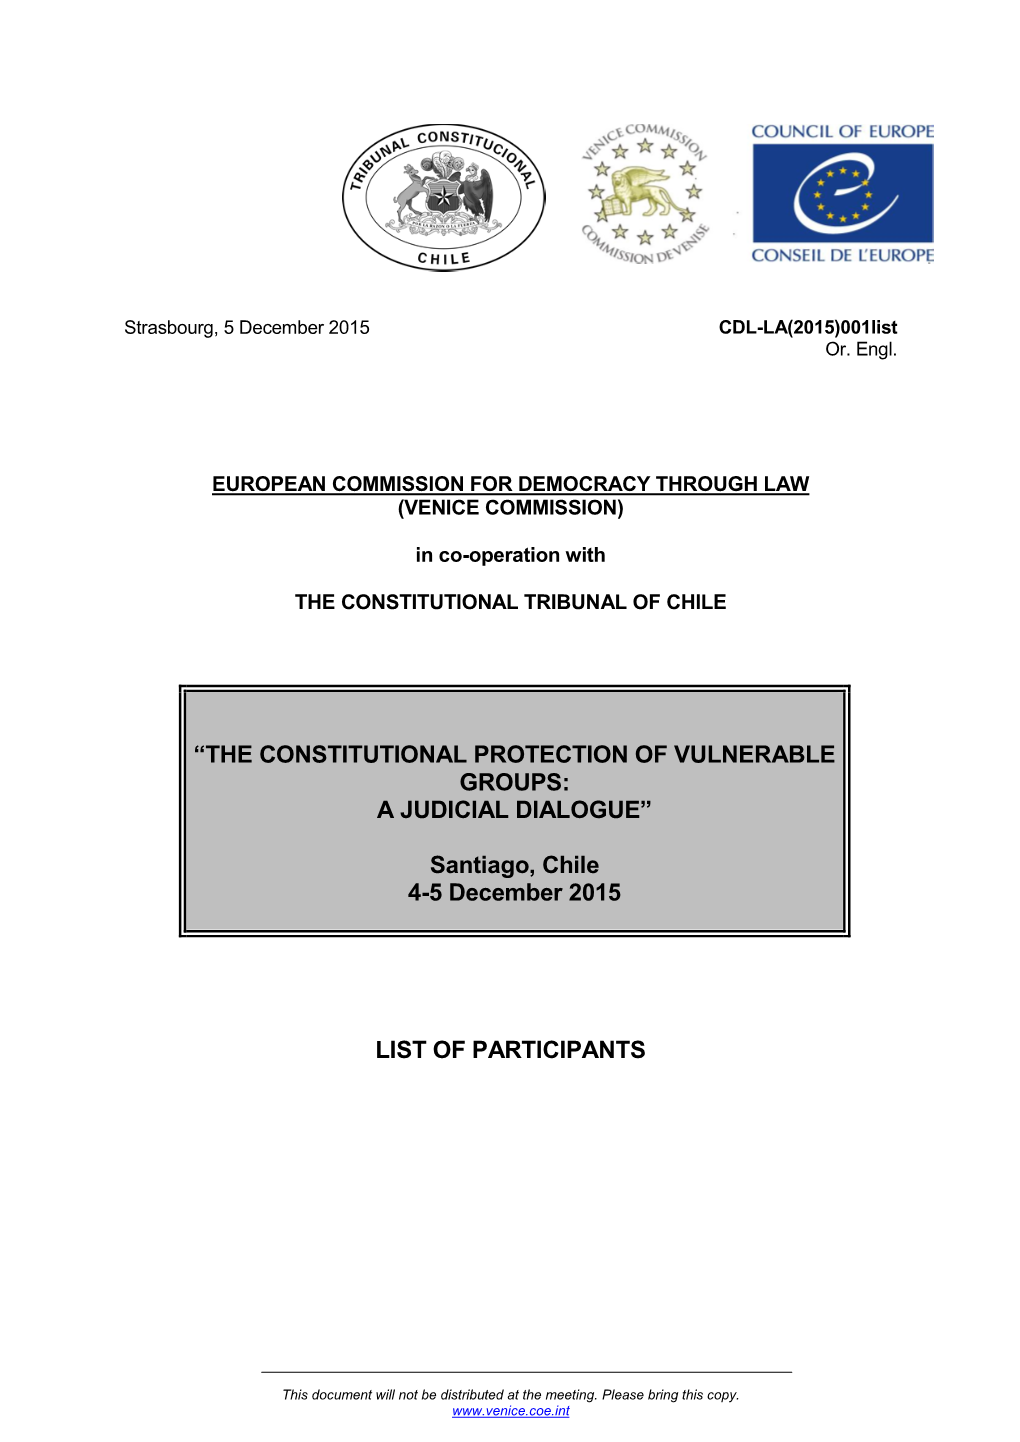 “The Constitutional Protection of Vulnerable Groups: a Judicial Dialogue”